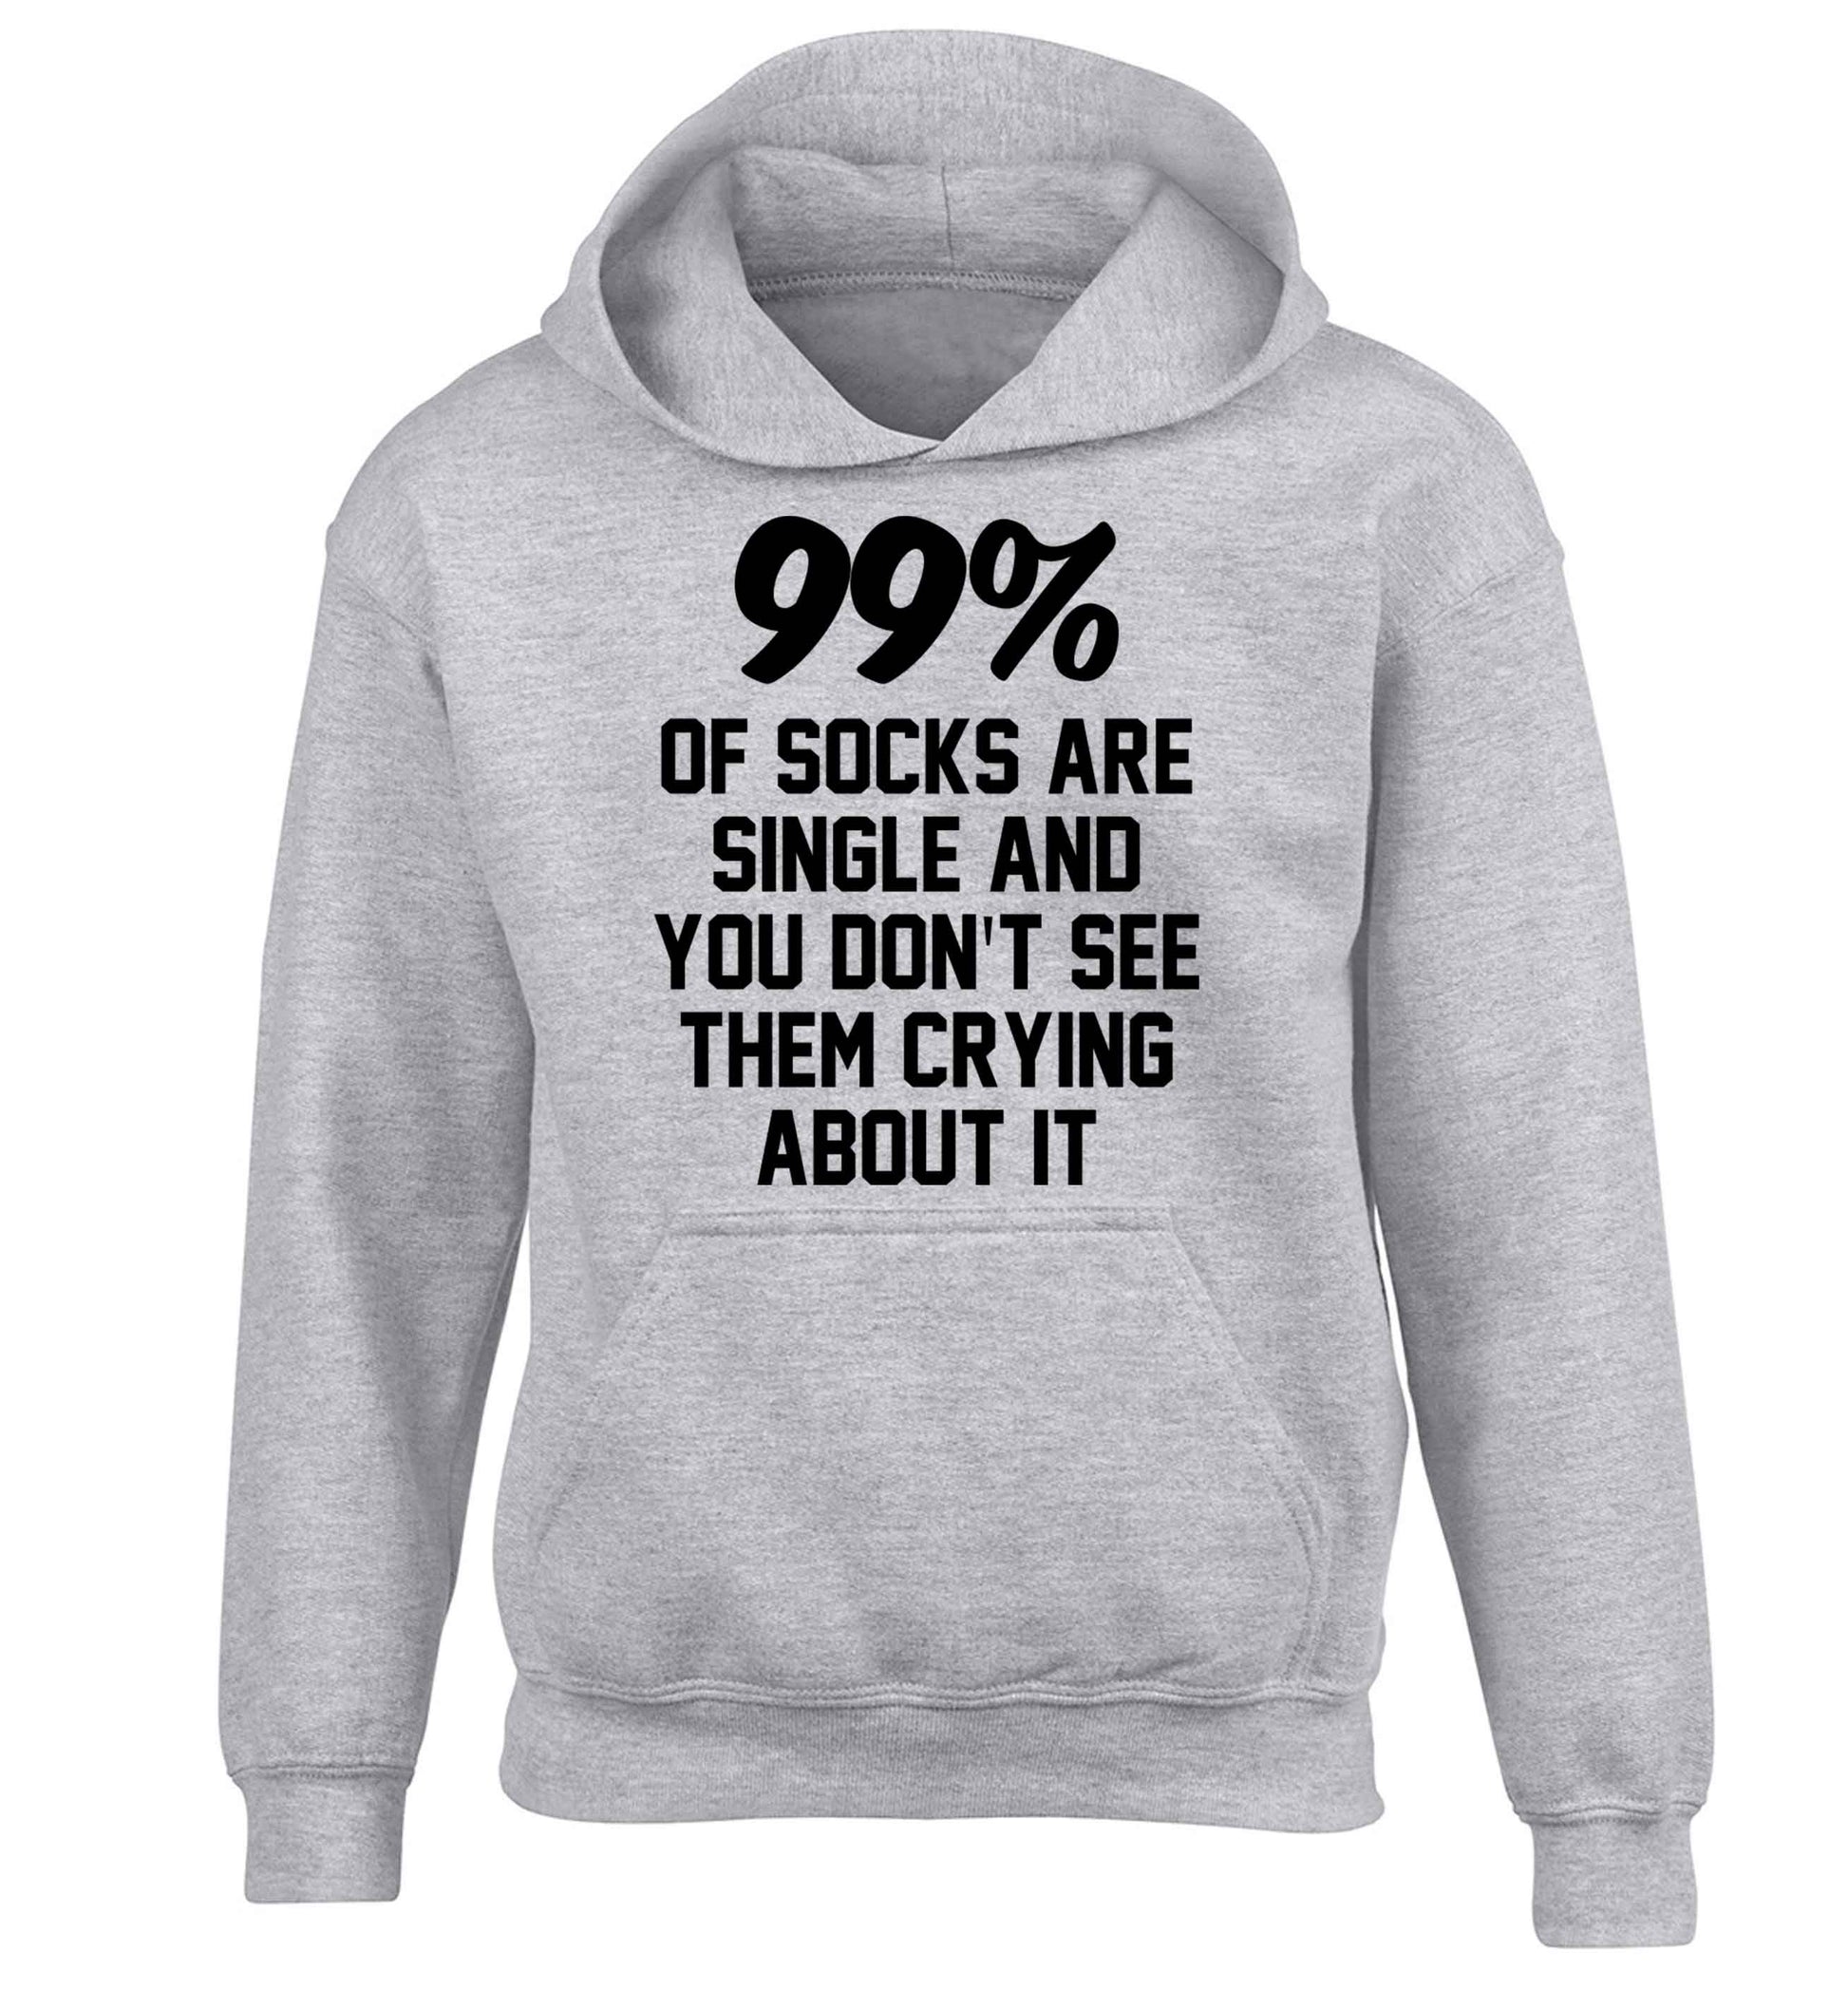 99% of socks are single and you don't see them crying about it children's grey hoodie 12-13 Years